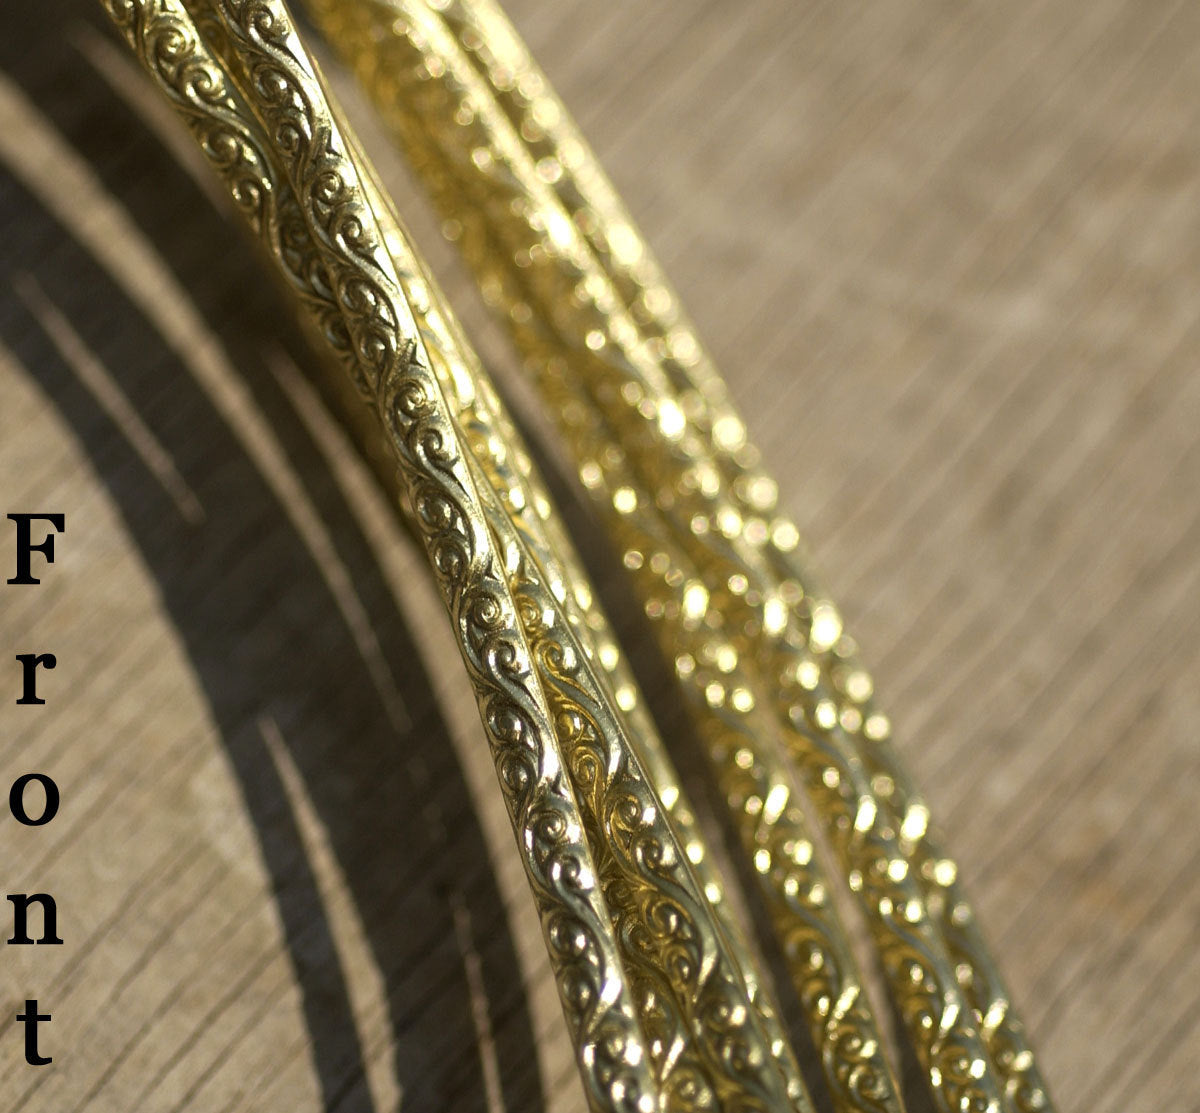 Raw Brass patterned wire for making rings and bangle bracelets, gallery wire